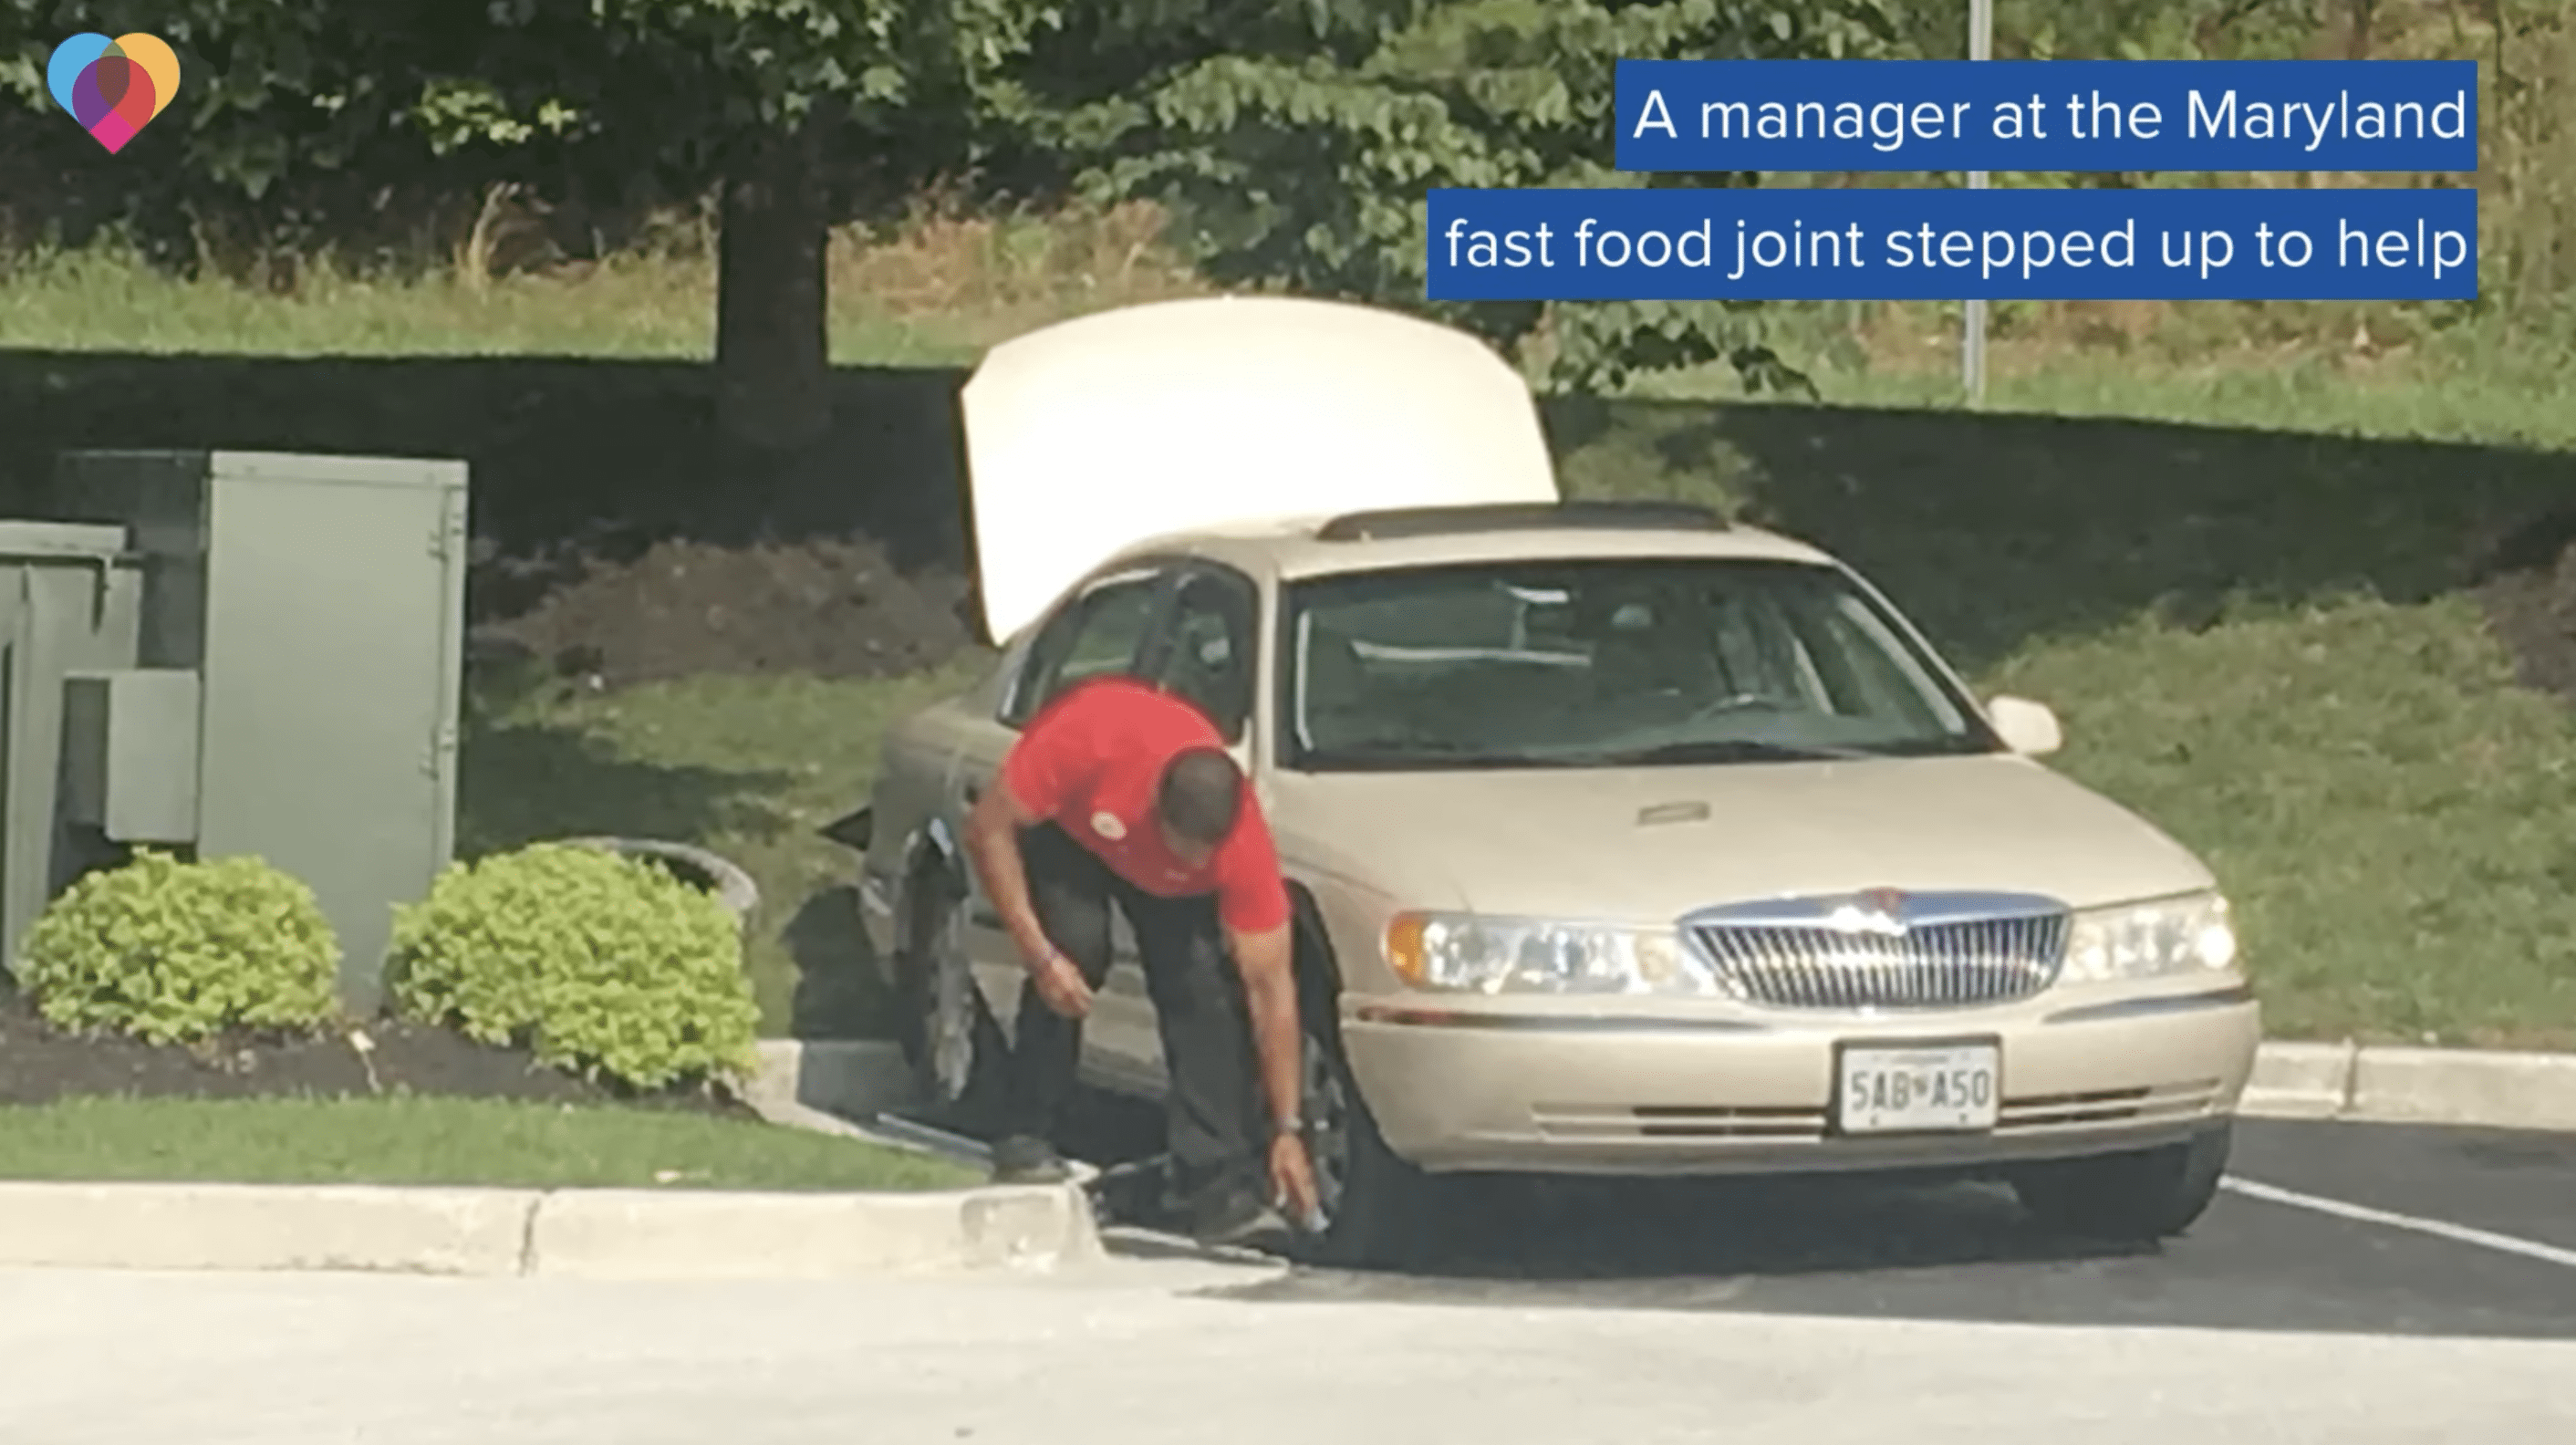 One of the managers at the restaurant volunteered to change the veteran's flat tire. | Photo: YouTube.com/CBS News